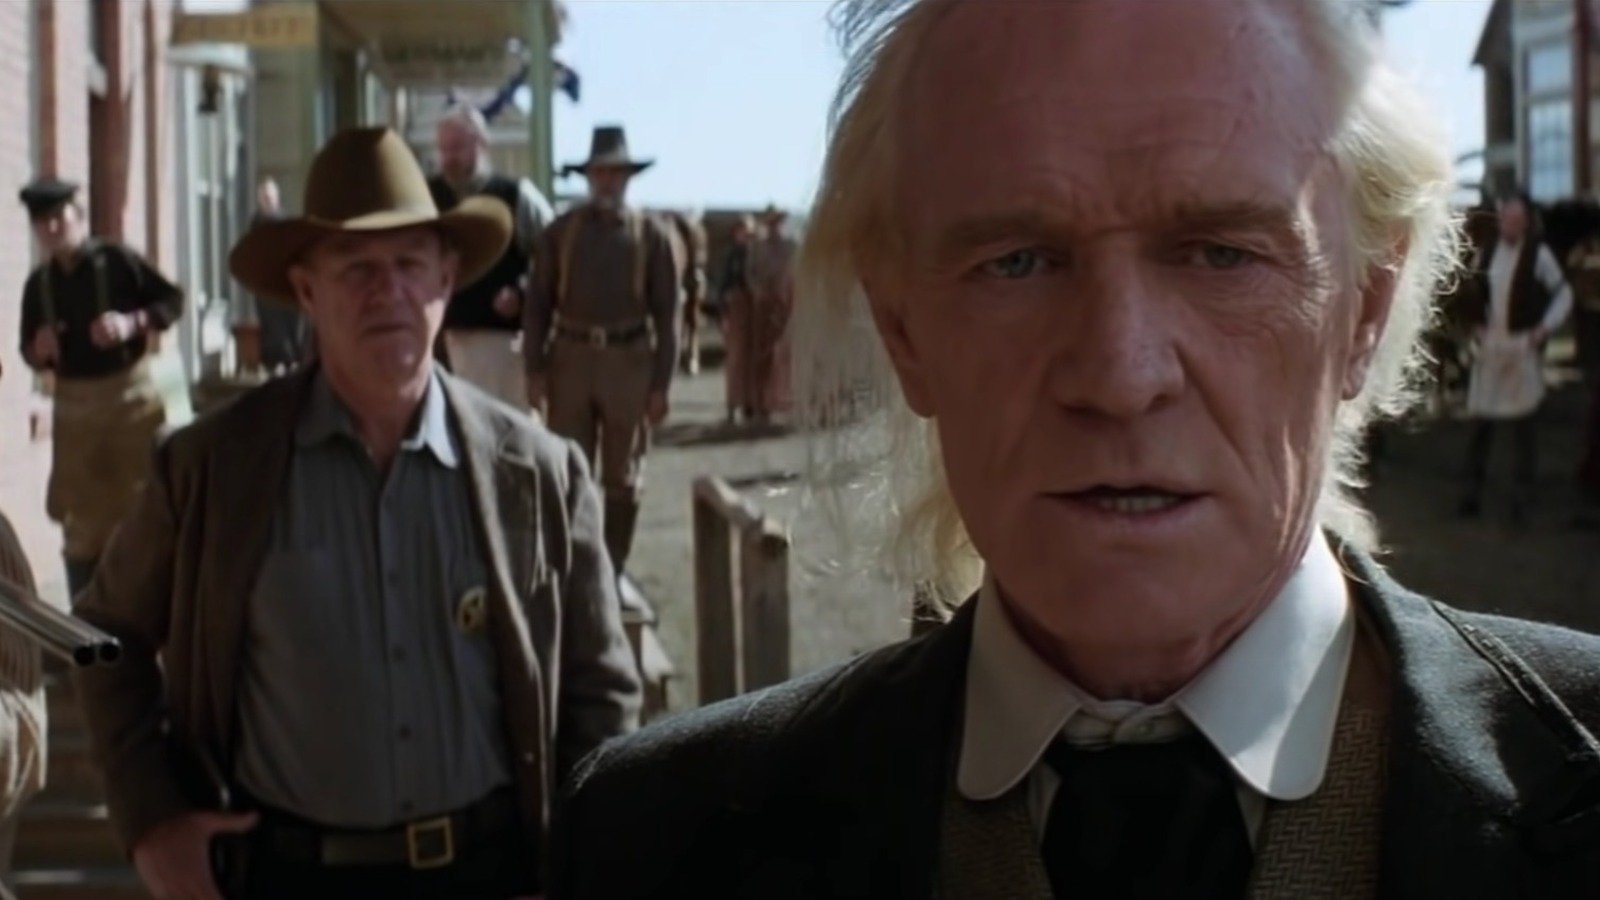 Richard Harris Brought A Dark Chapter Of British History To His Unforgiven Performance - /Film